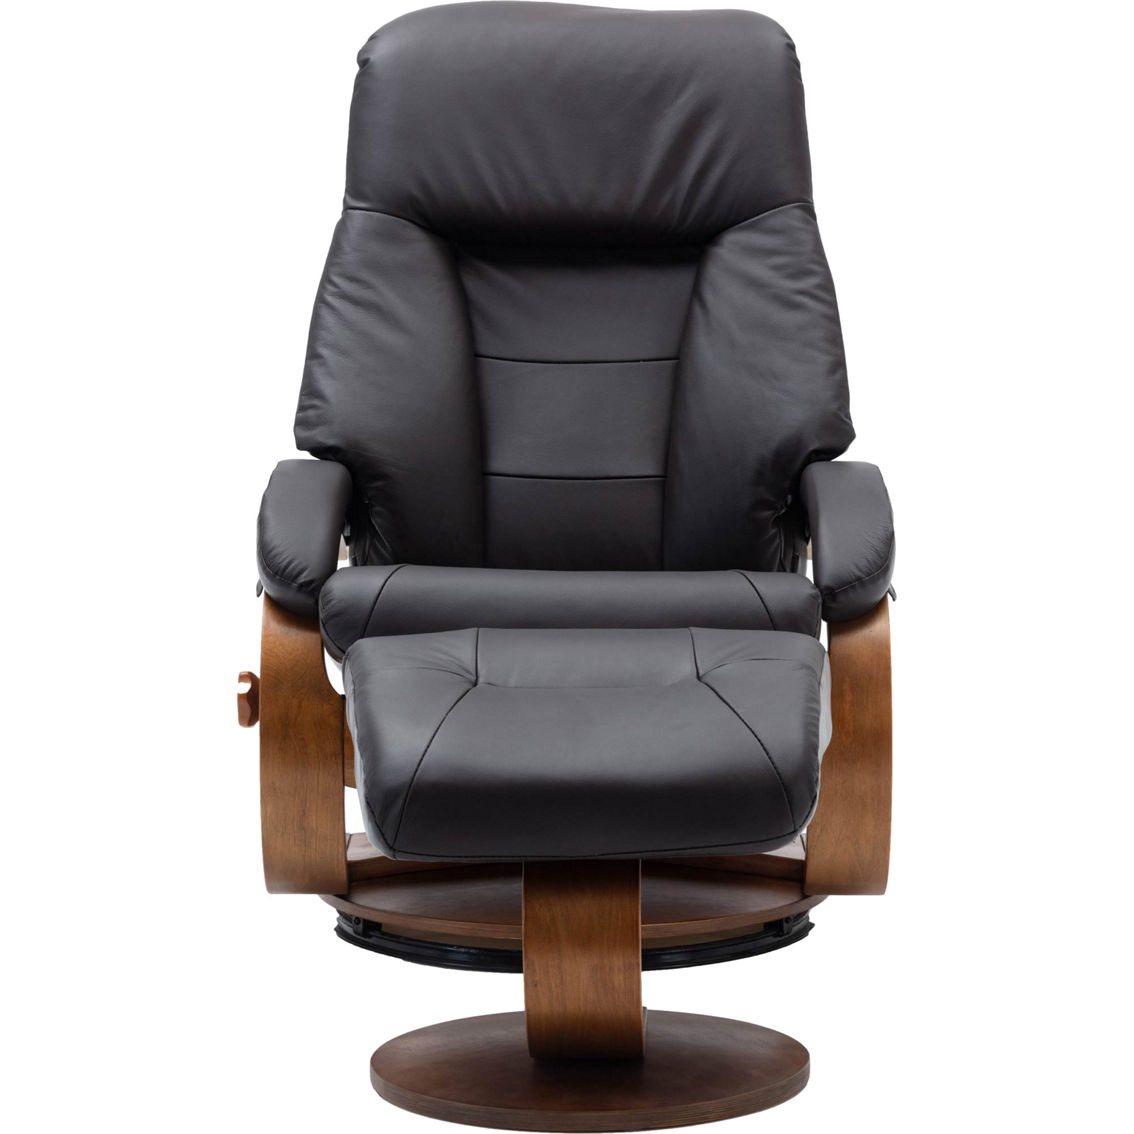 Progressive Furniture Montreal Recliner and Ottoman in Top Grain Leather - Image 2 of 2